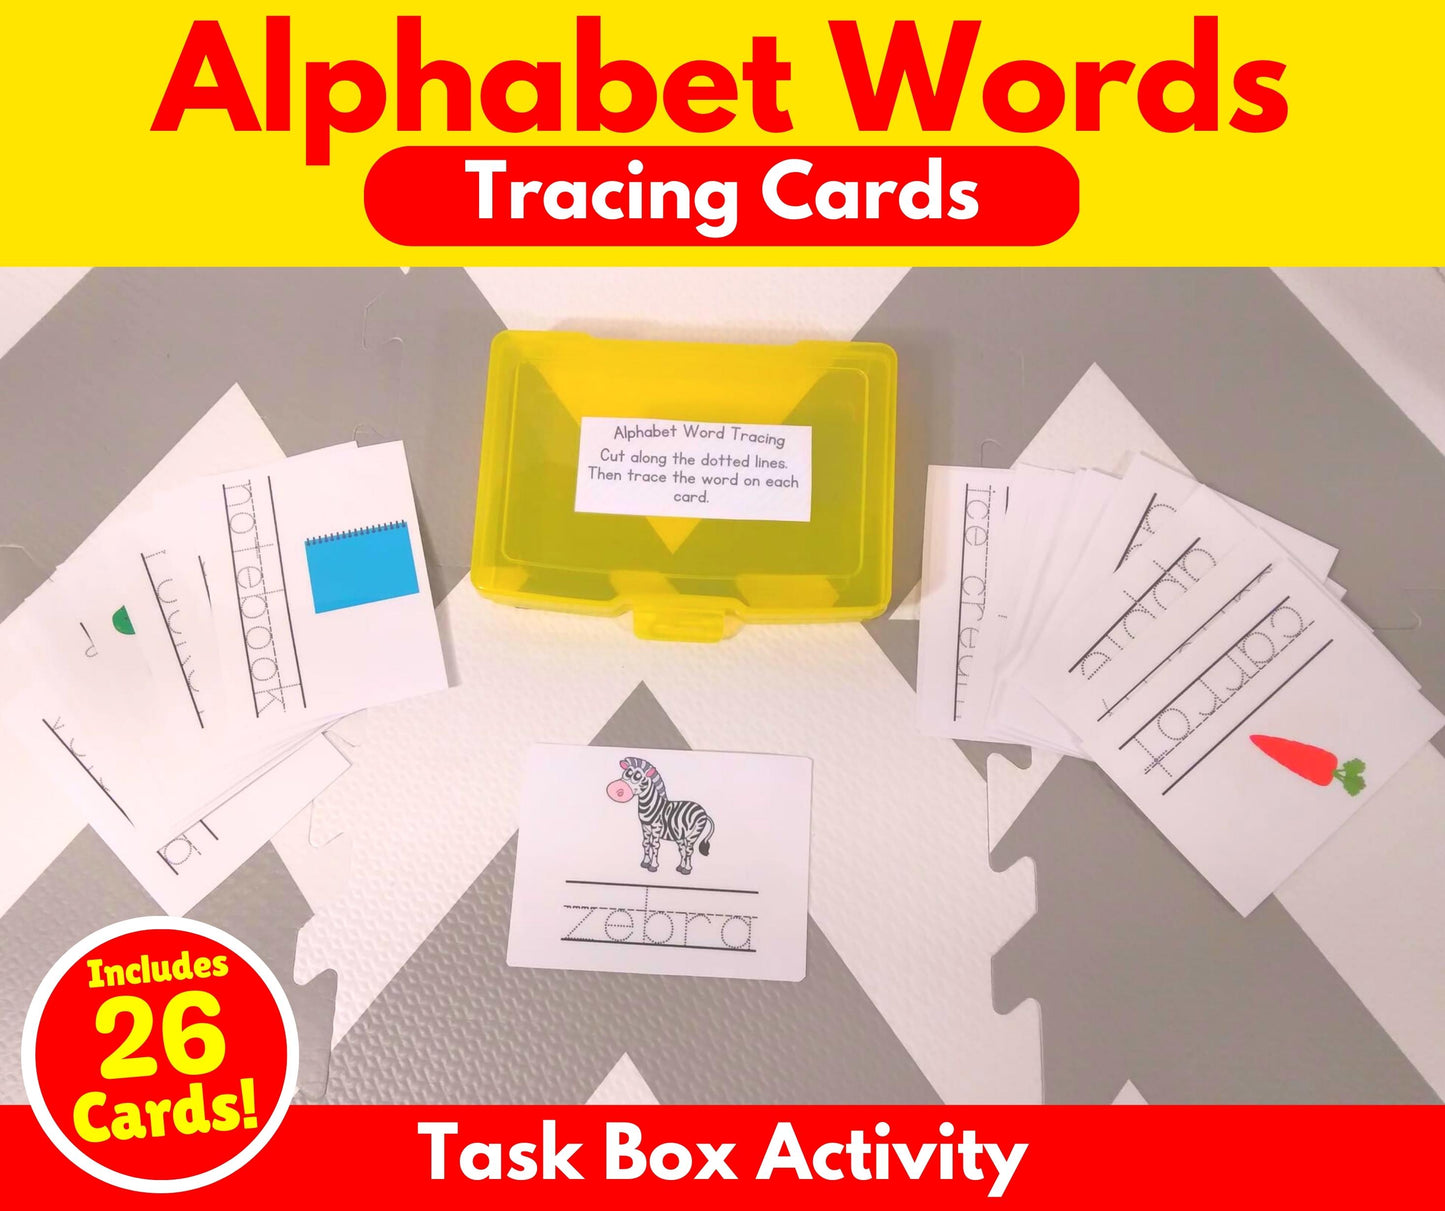 Alphabet Words Tracing Cards (Task Box Activity) - Download